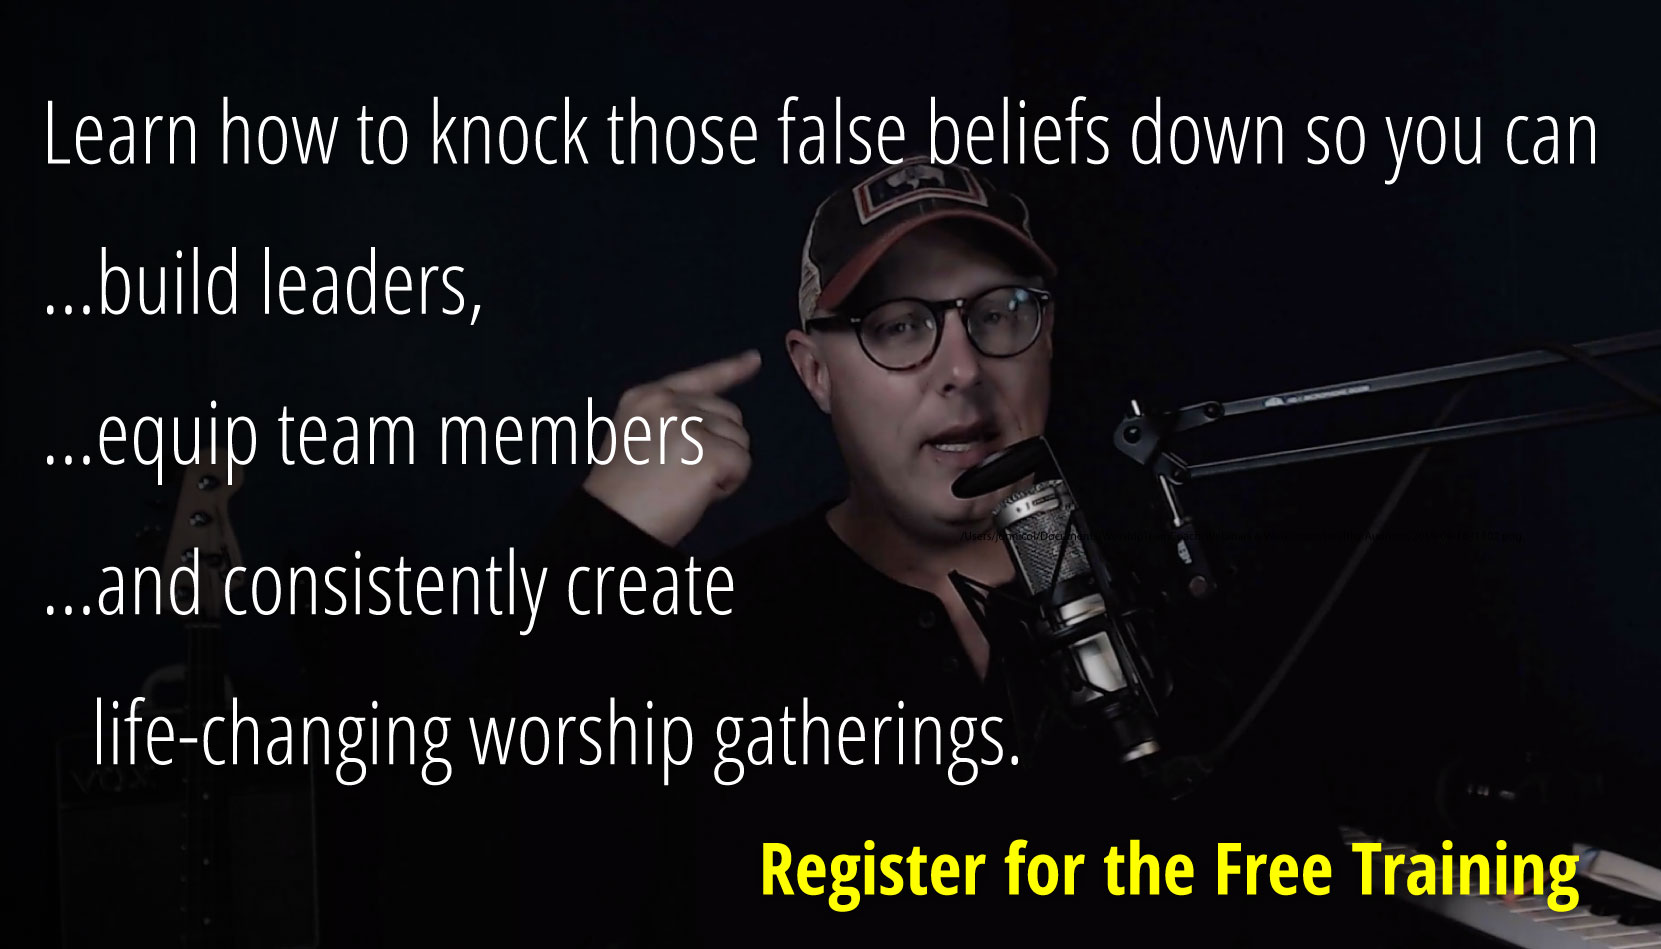 Learn how to knock those false beliefs down so you can build leaders, equip team members, and consistently create life-changing worship gatherings.